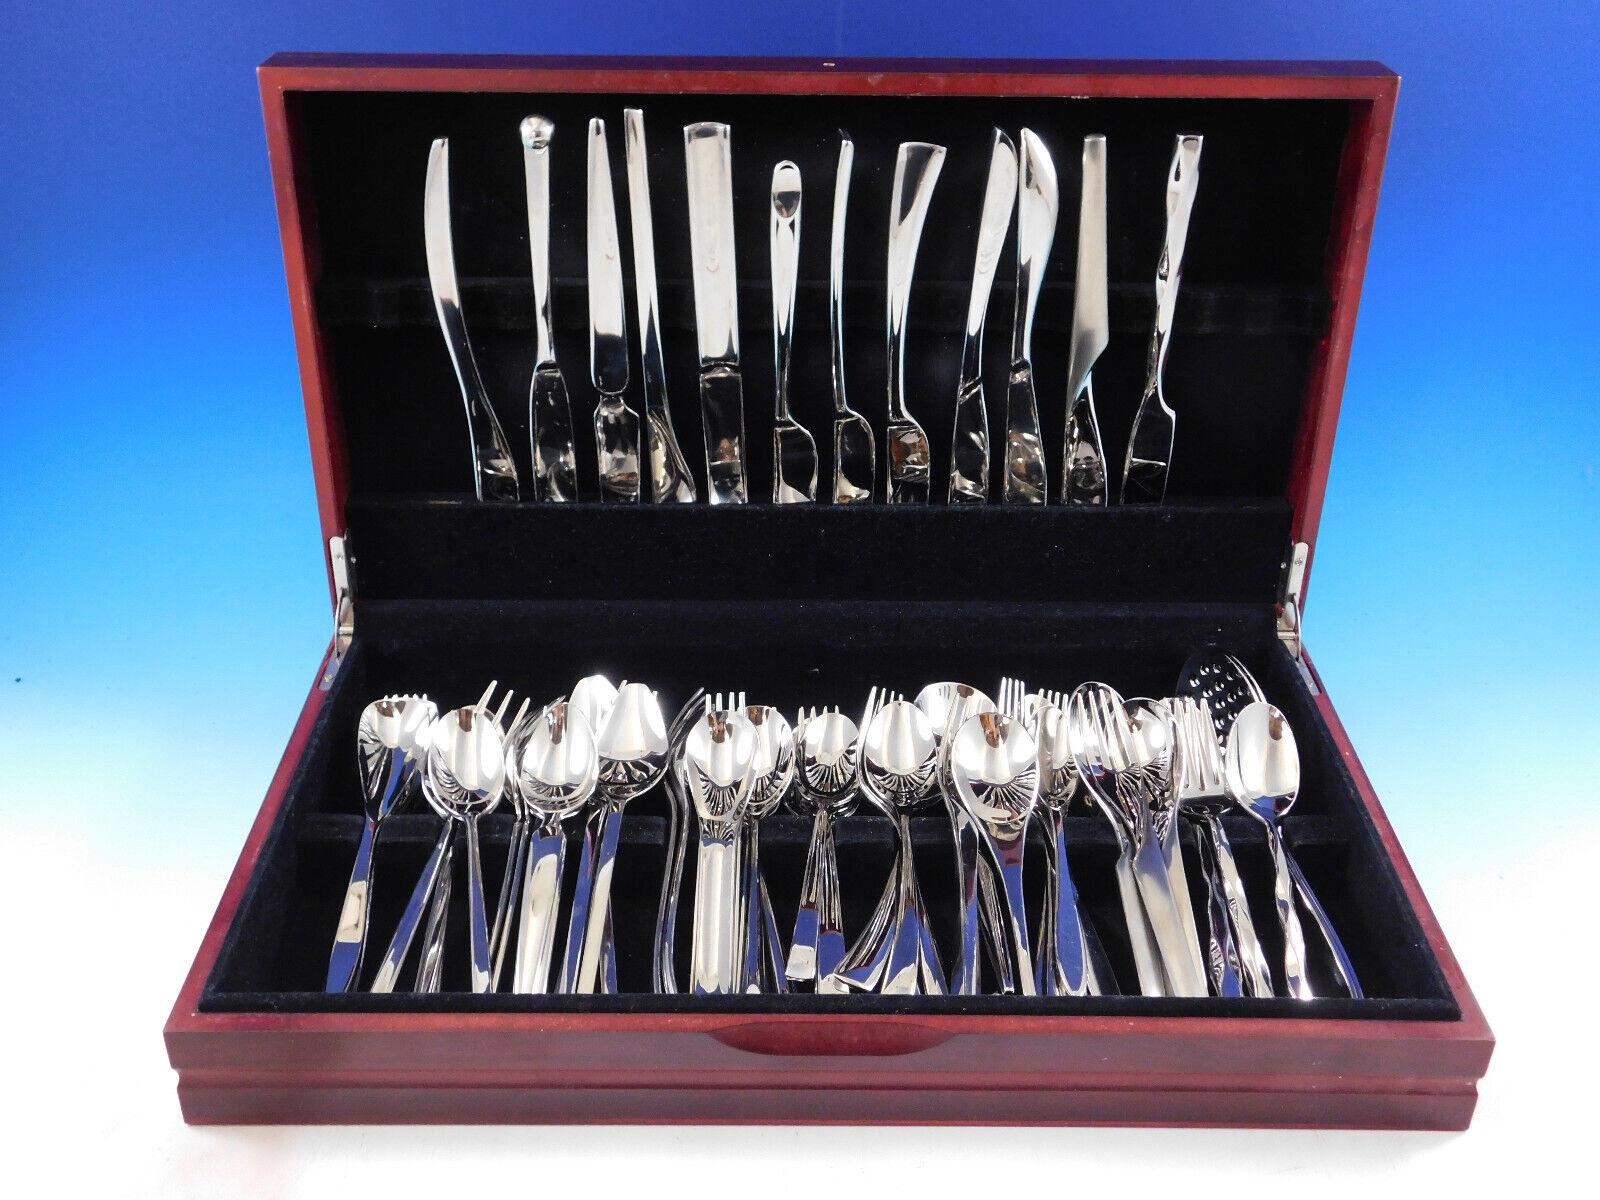 Fabulous high quality Modern designer patterns in a unique mixed stainless steel flatware service for 12 - 62 pieces total. 

This set includes one 5-piece place setting (1 dinner knife, 1 dinner fork, 1 salad fork, 1 teaspoon, and 1 dinner spoon)